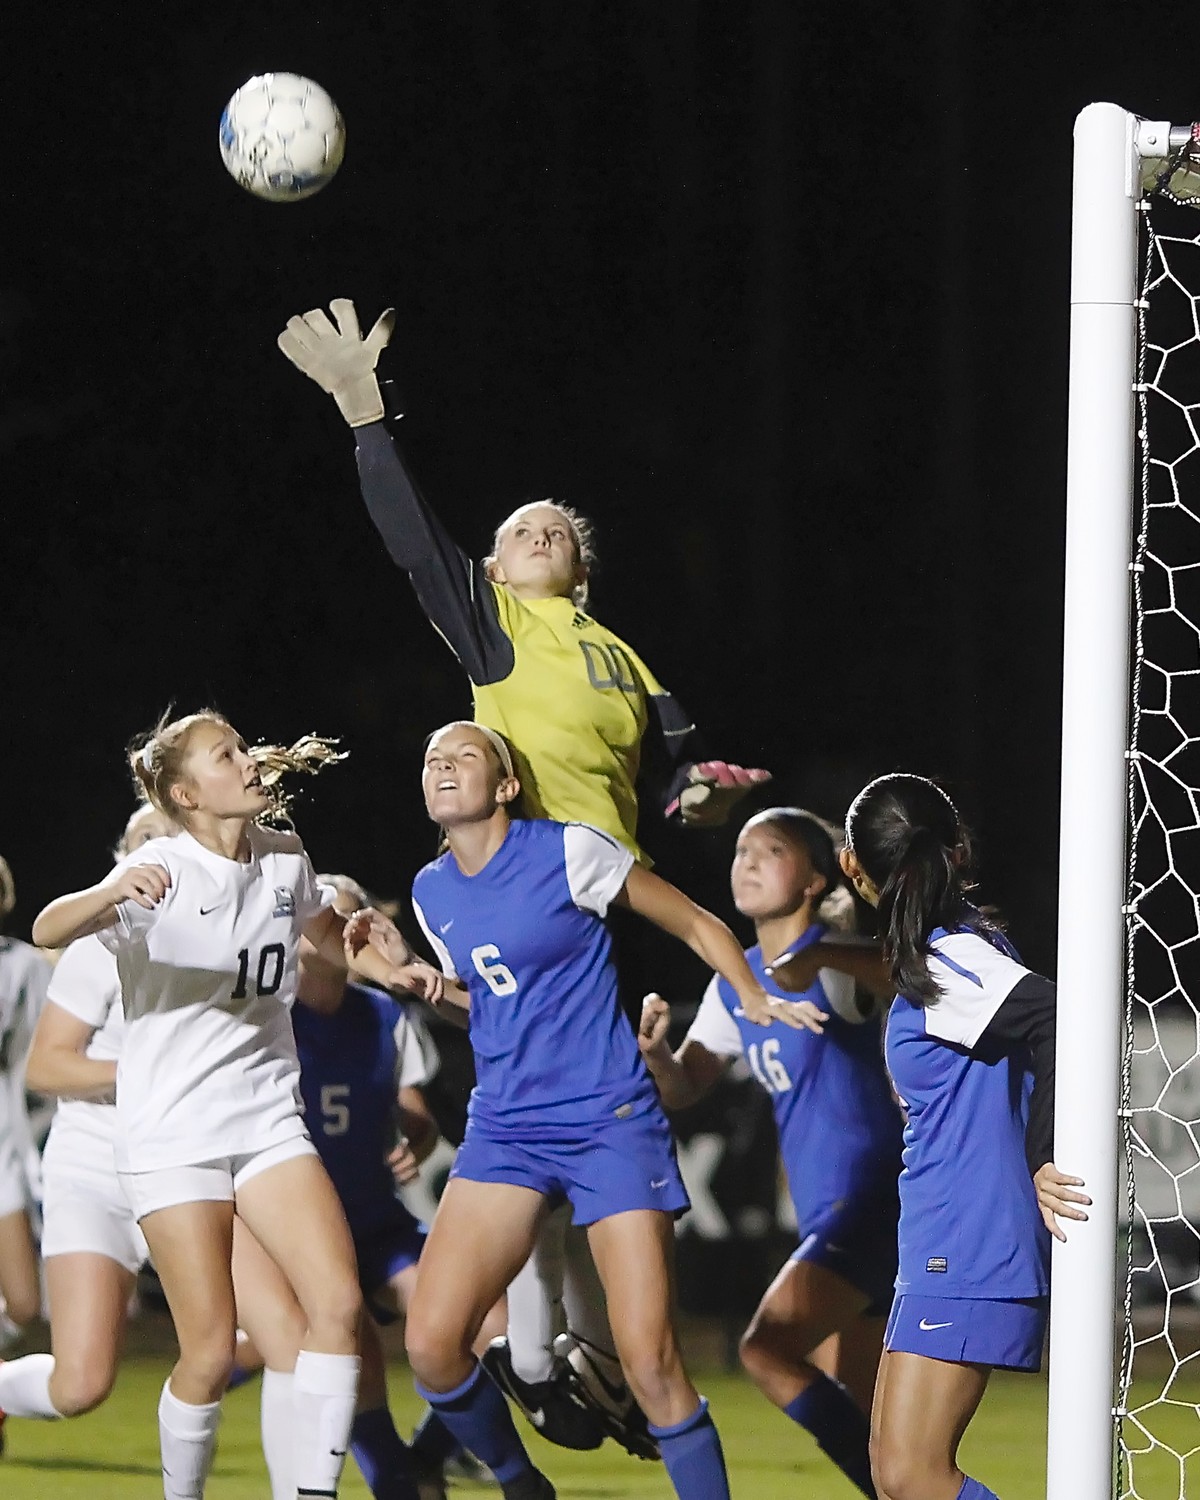 The Clay goalkeeper leaps high to make a save.